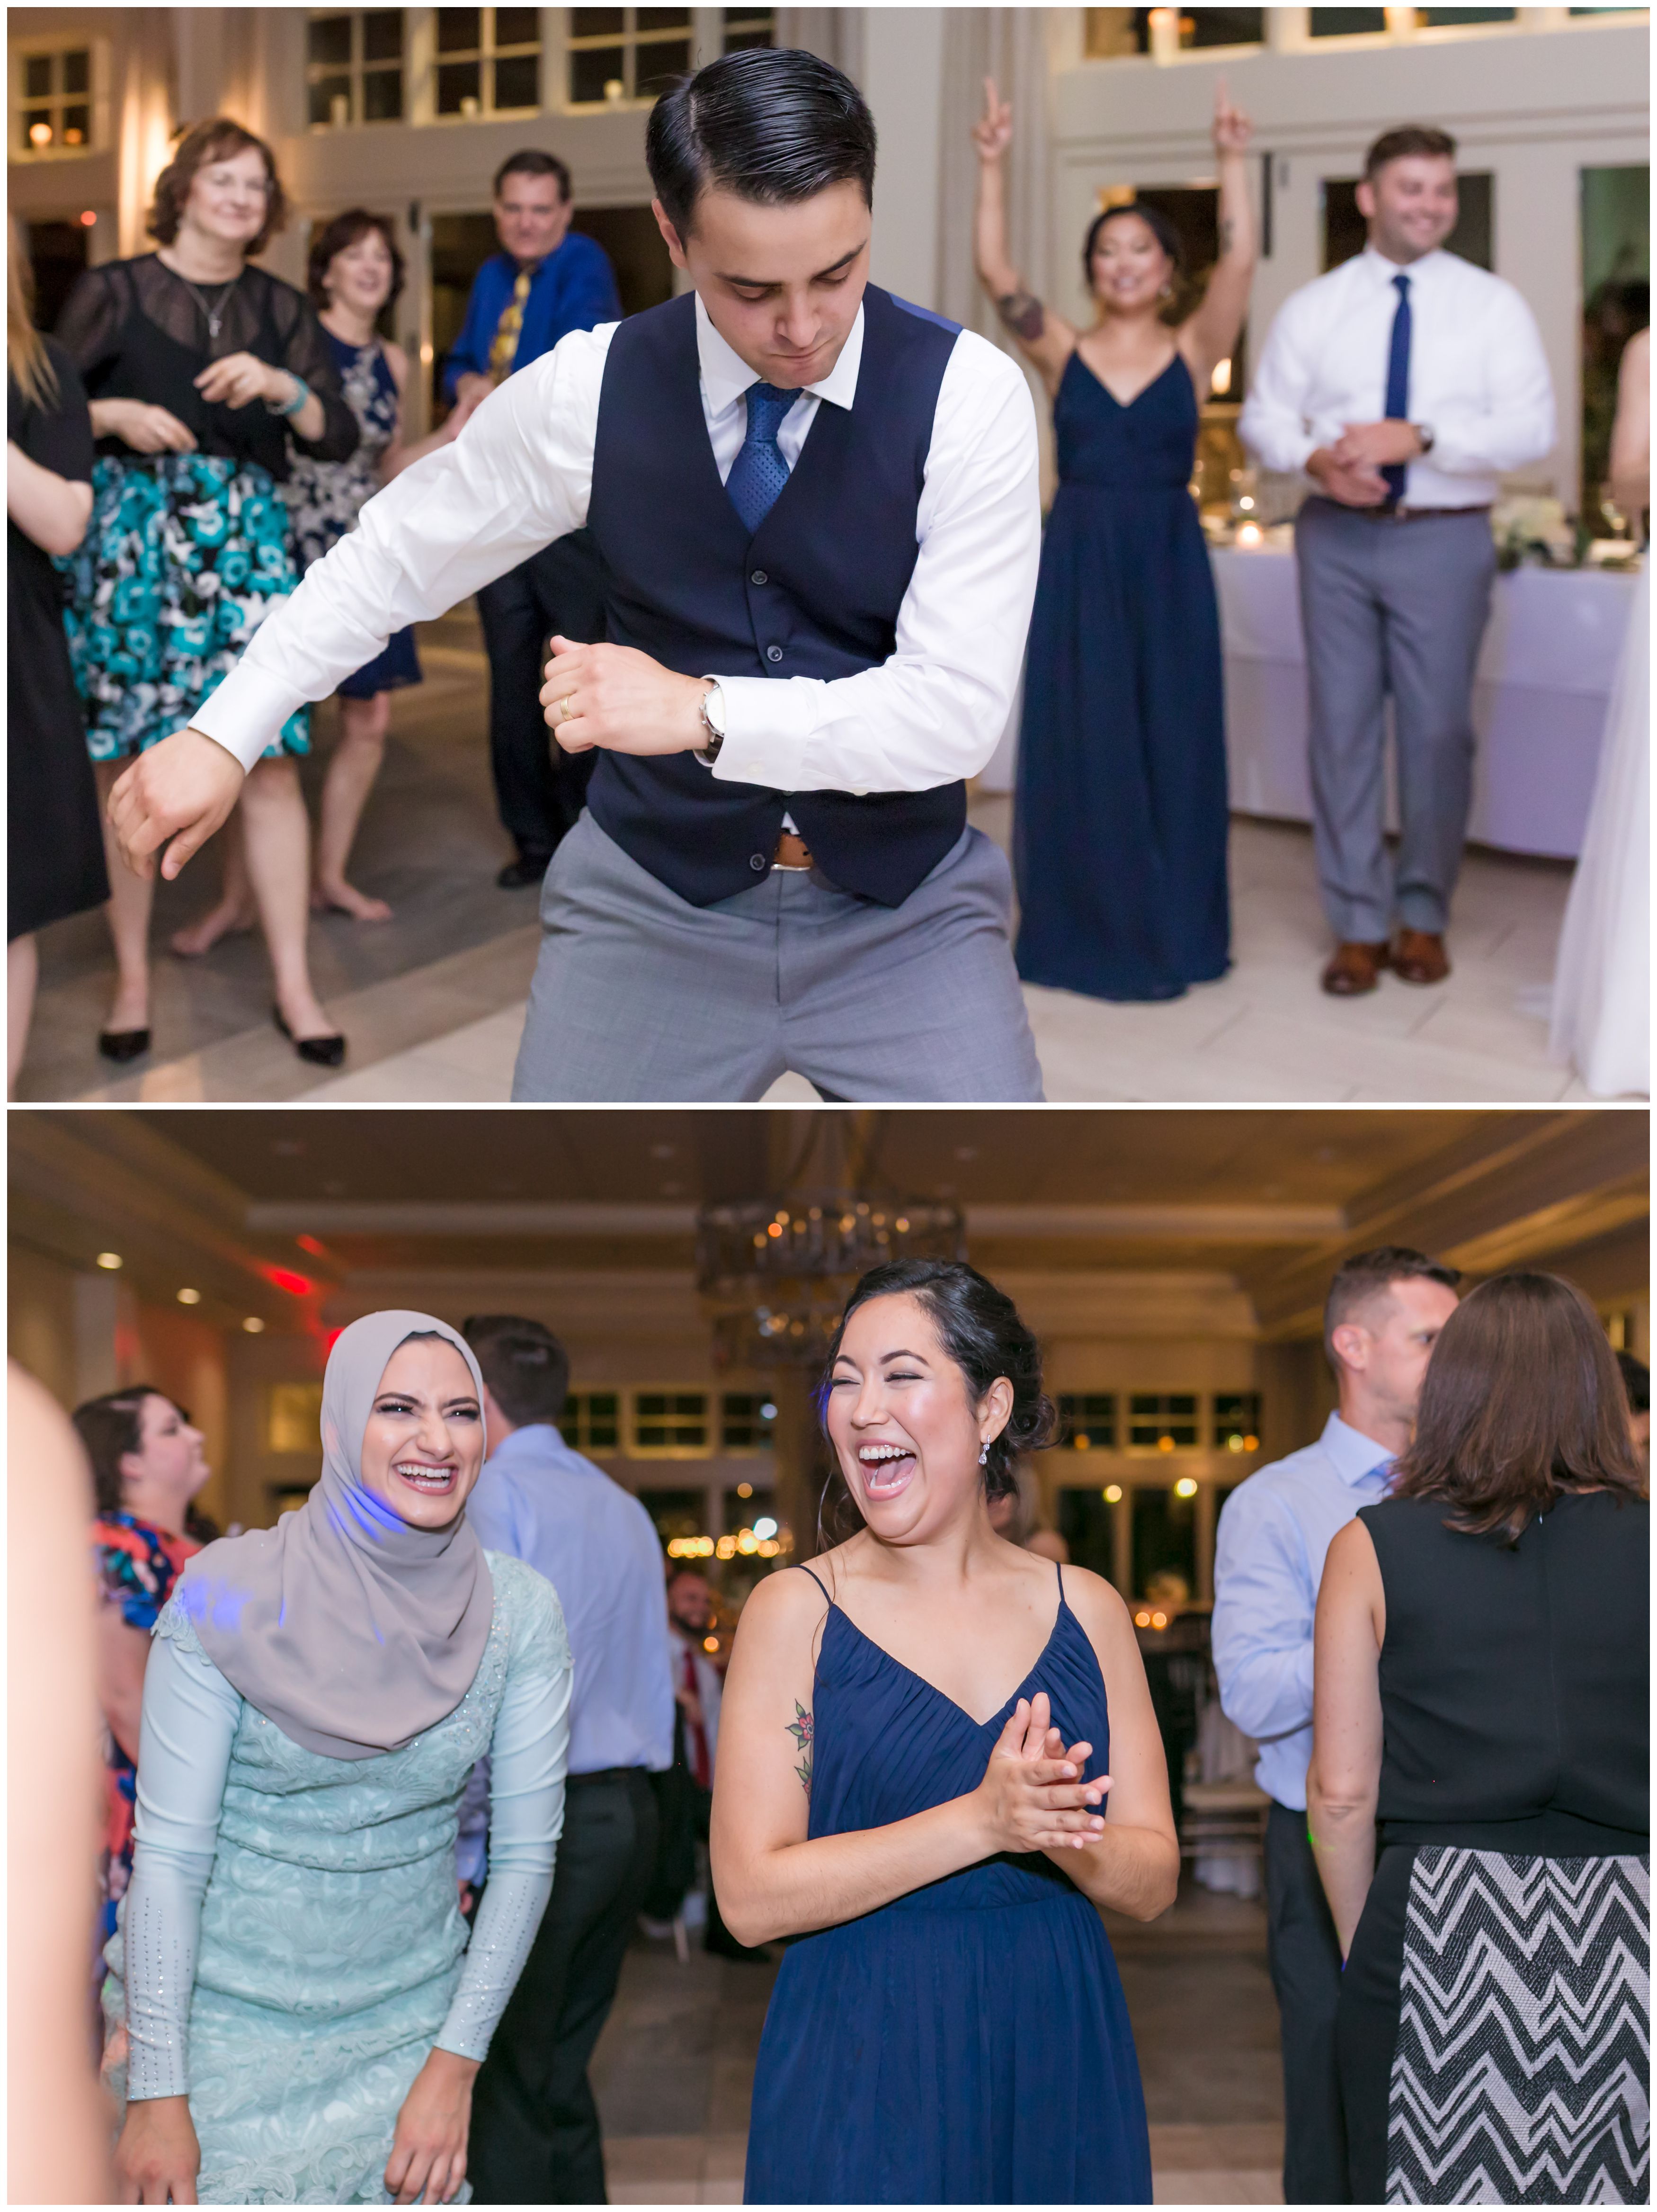 Dancing photos at the Indian Trail Club